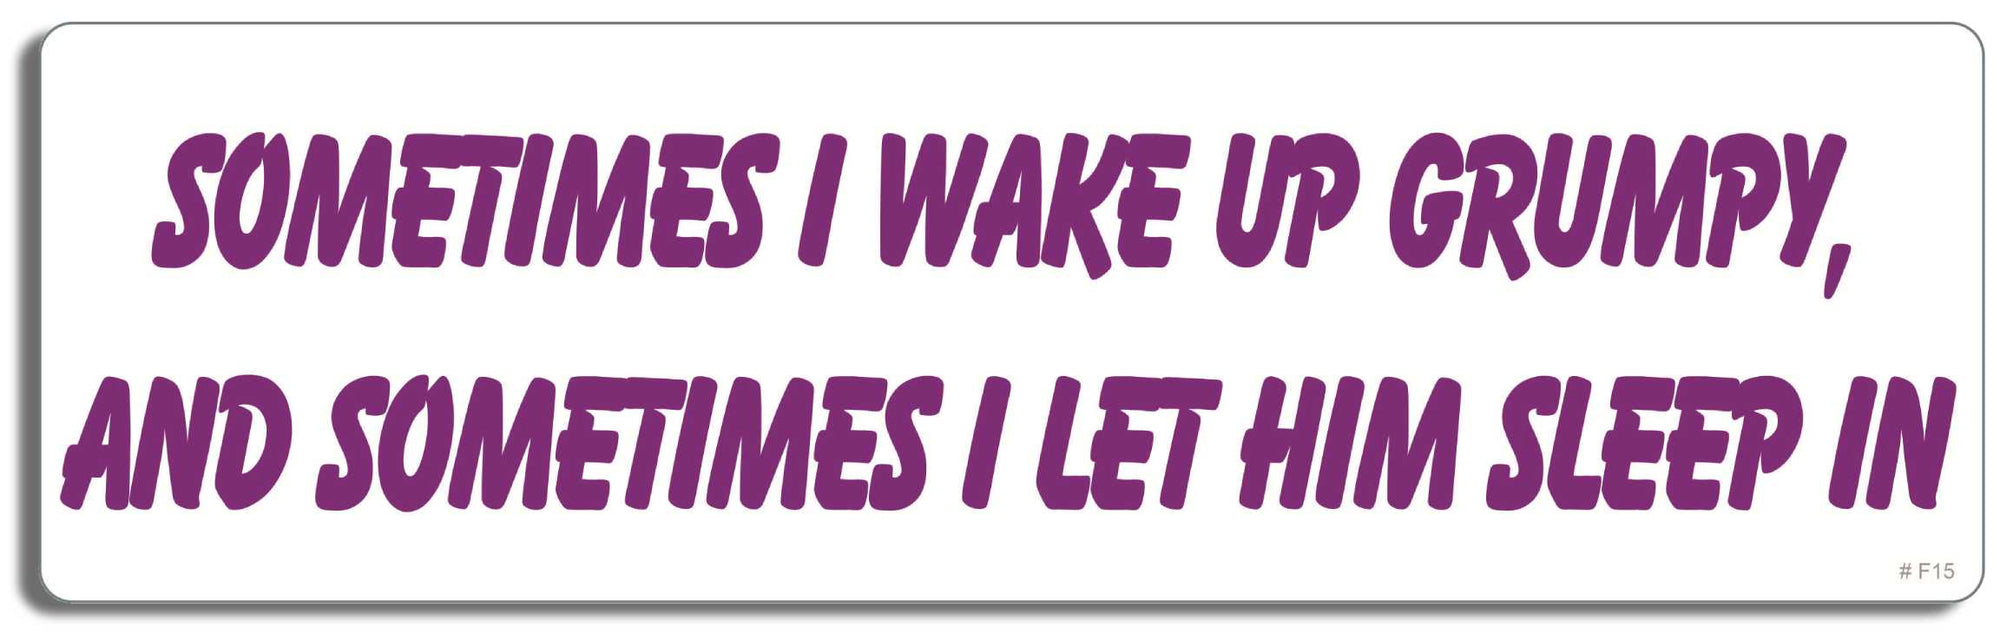 Sometimes I wake up grumpy, and sometimes I let him sleep in - 3" x 10" Bumper Sticker--Car Magnet- -  Decal Bumper Sticker-funny Bumper Sticker Car Magnet Sometimes I wake up grumpy, and sometimes-  Decal for carsMen